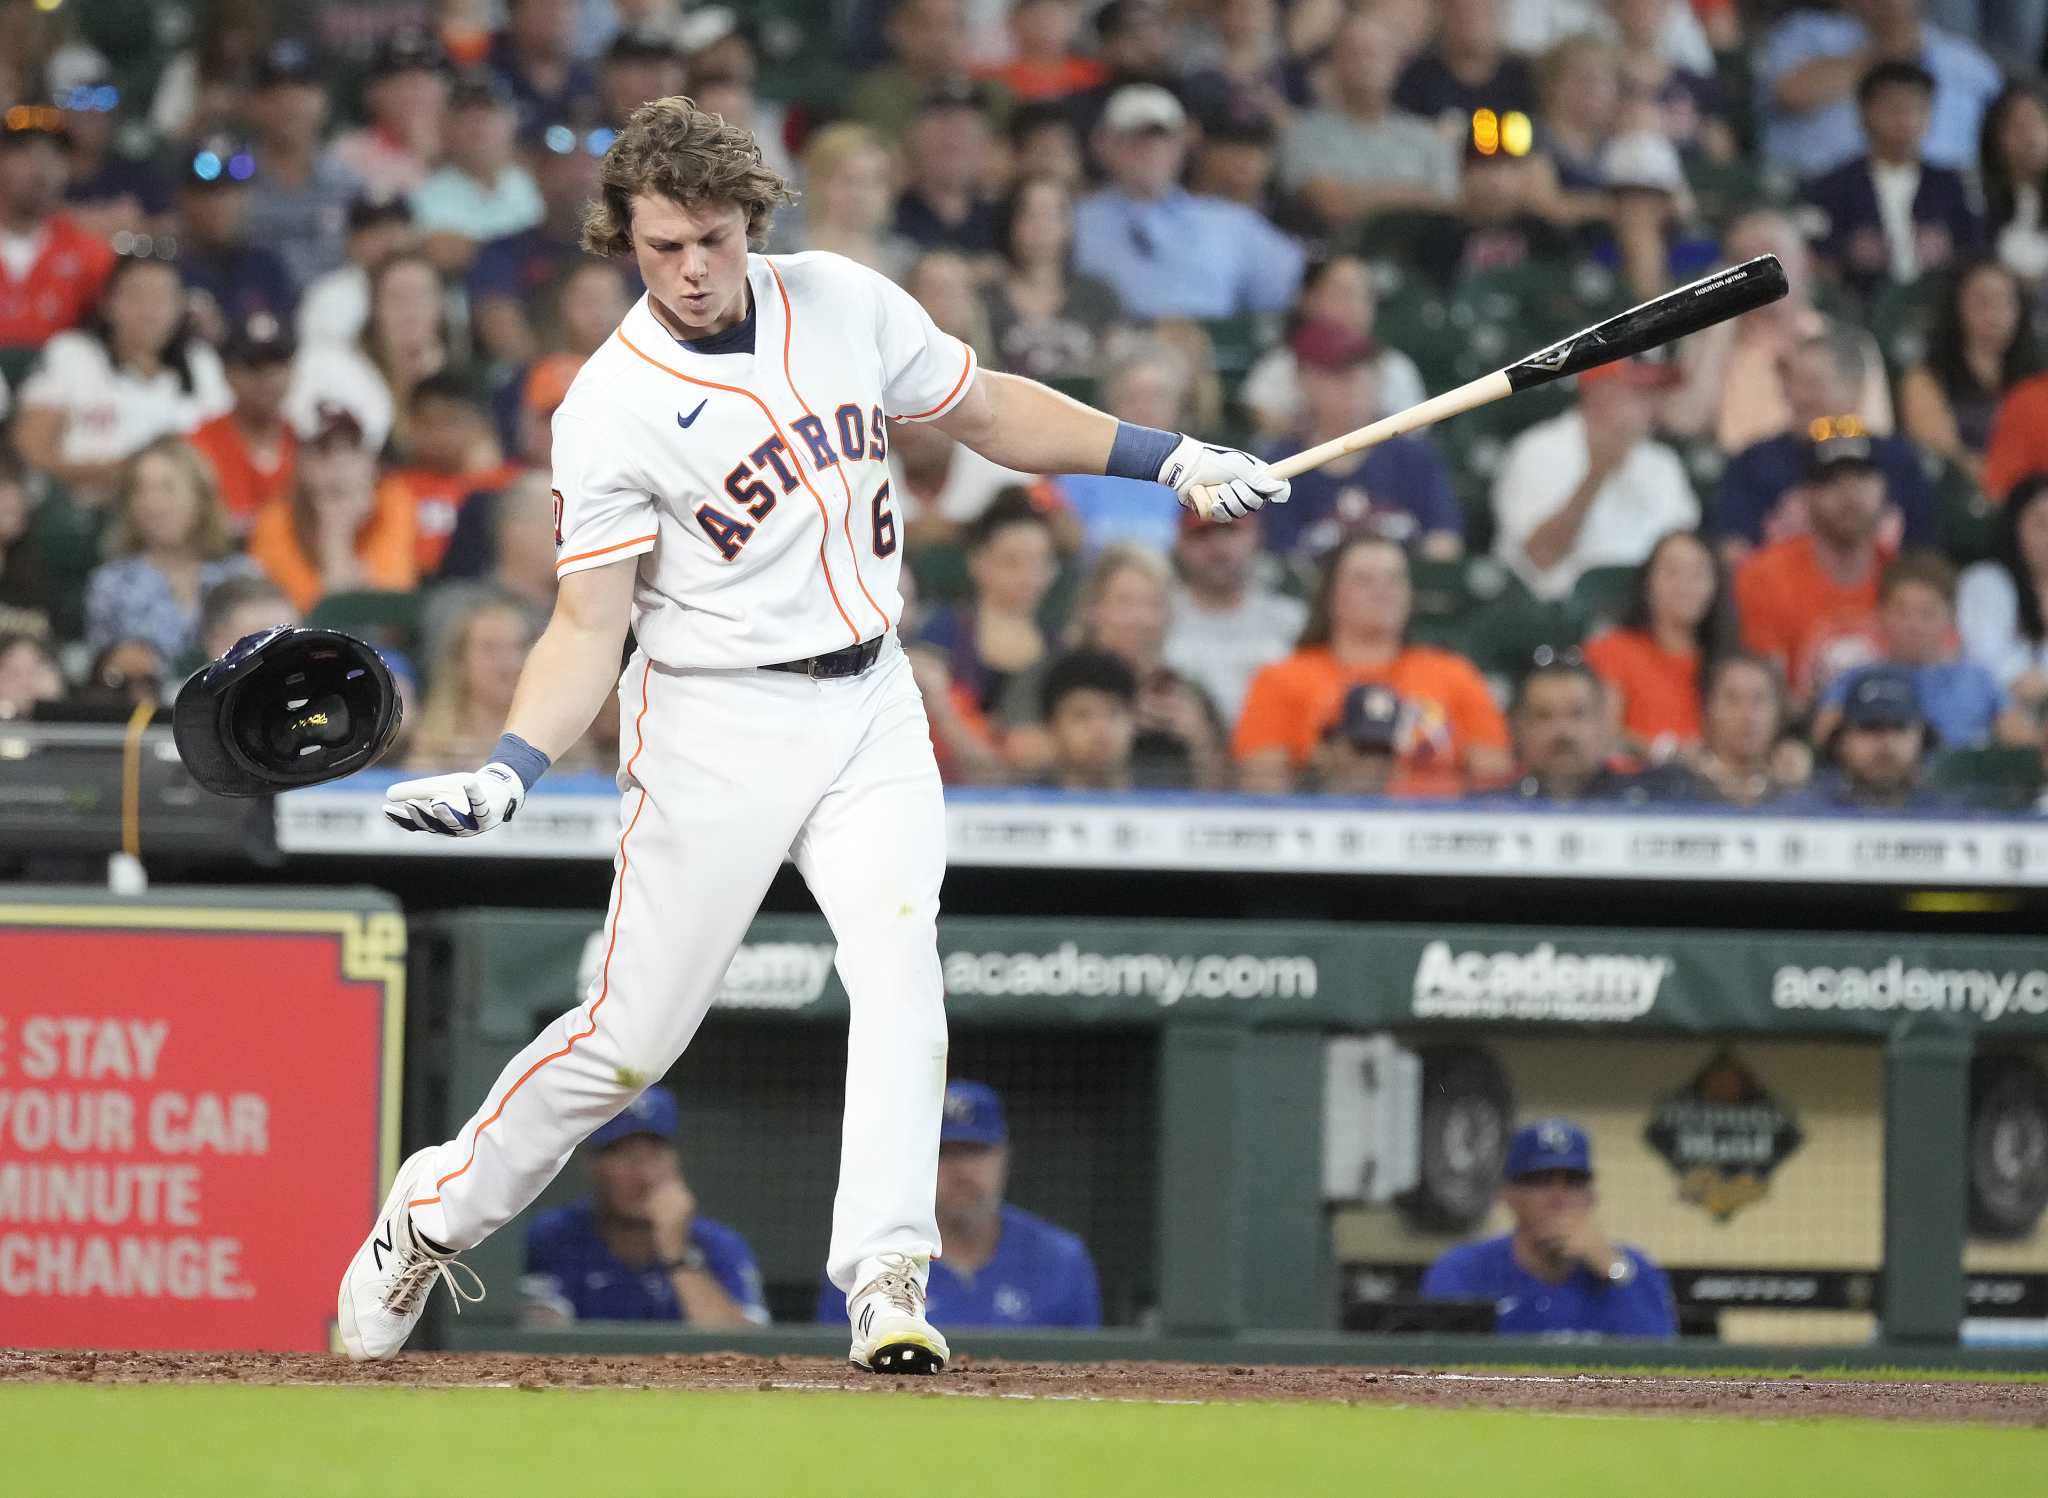 Jake Meyers has rebounded real nicely in 2023! : r/Astros